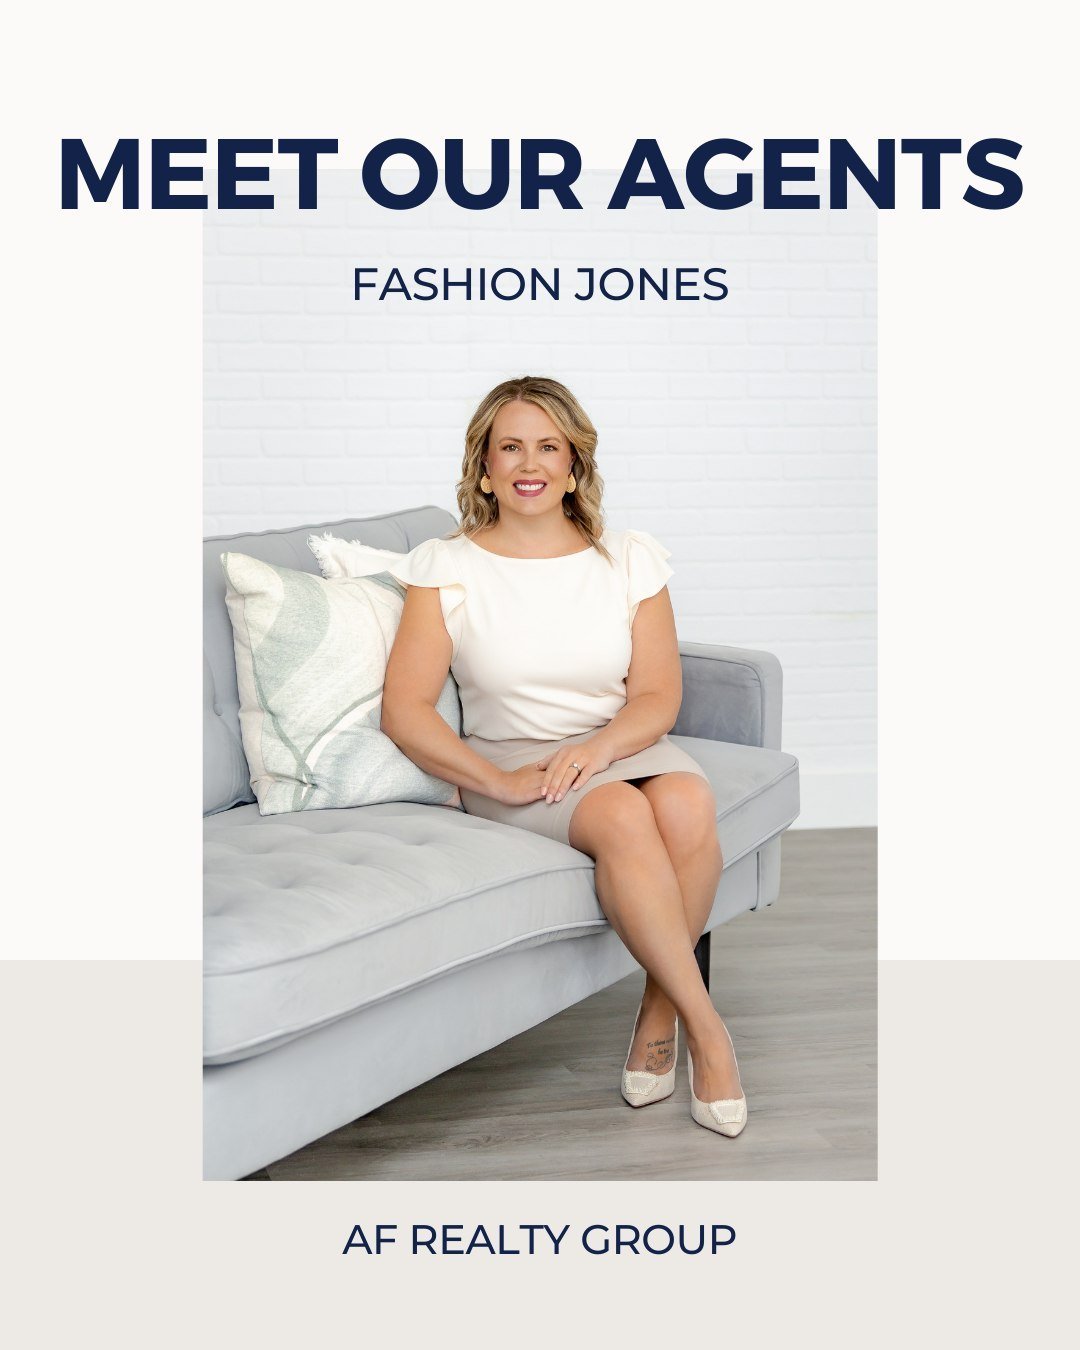 Introducing our stellar agents at AF Realty Group! 🏡 From seasoned experts to rising stars, each member of our AF family brings something unique and different to the table! These individuals go above and beyond, whether working with clients in their